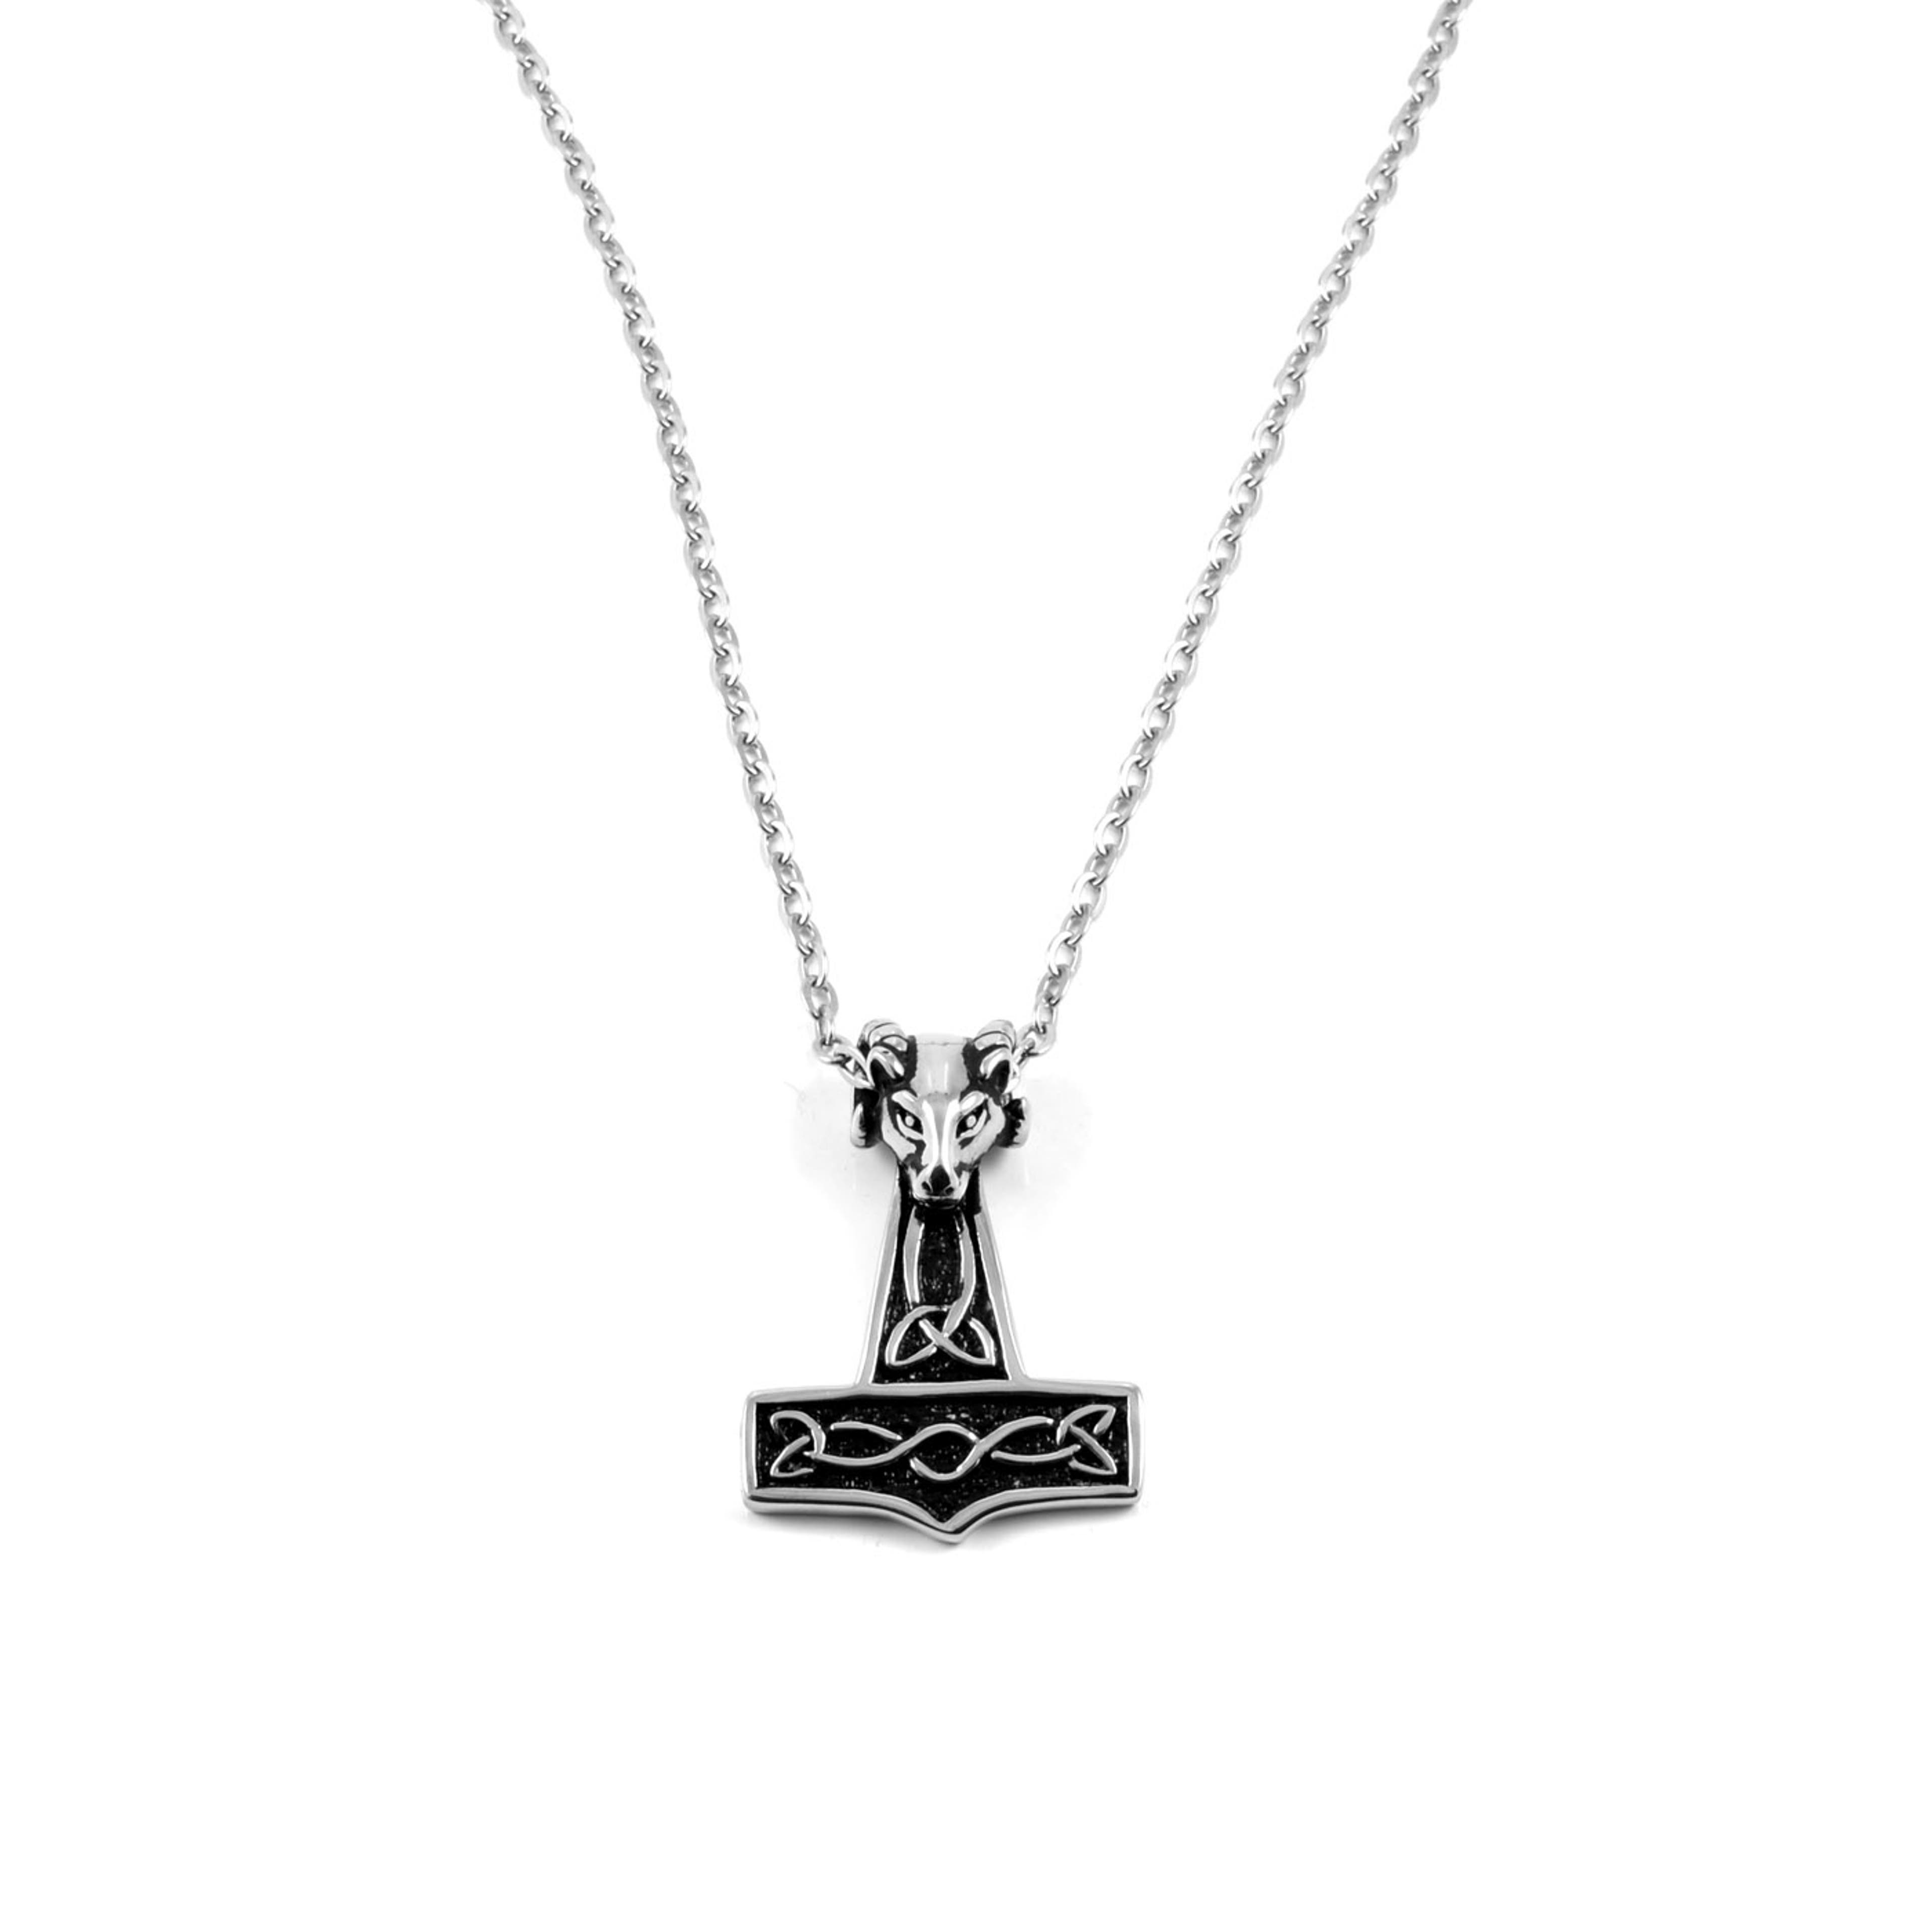 Silver-Tone Thor's Hammer Steel Necklace